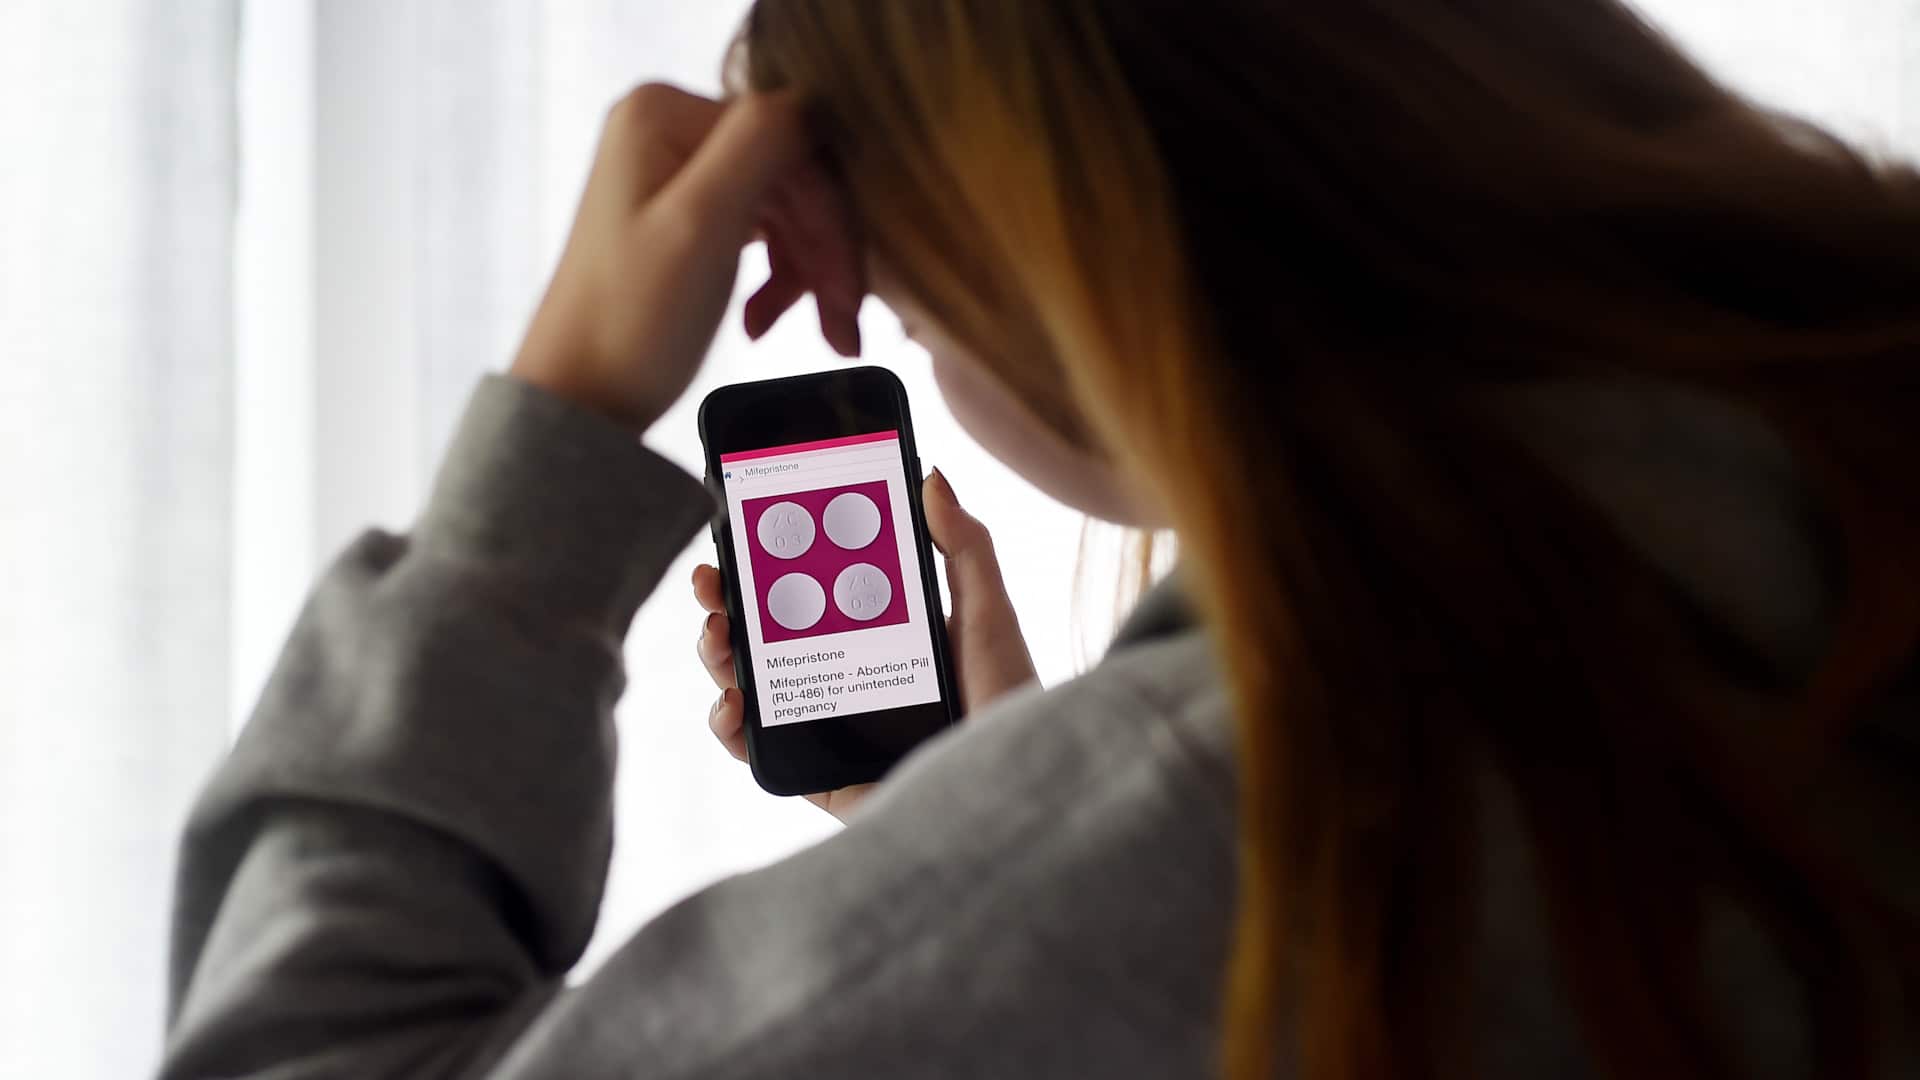 Medication abortion involves taking two medications, mifepristone and misoprostol, displayed here on a smartphone. Until last July, the FDA required these medications to be dispensed in a clinic, despite evidence for their safety at home.